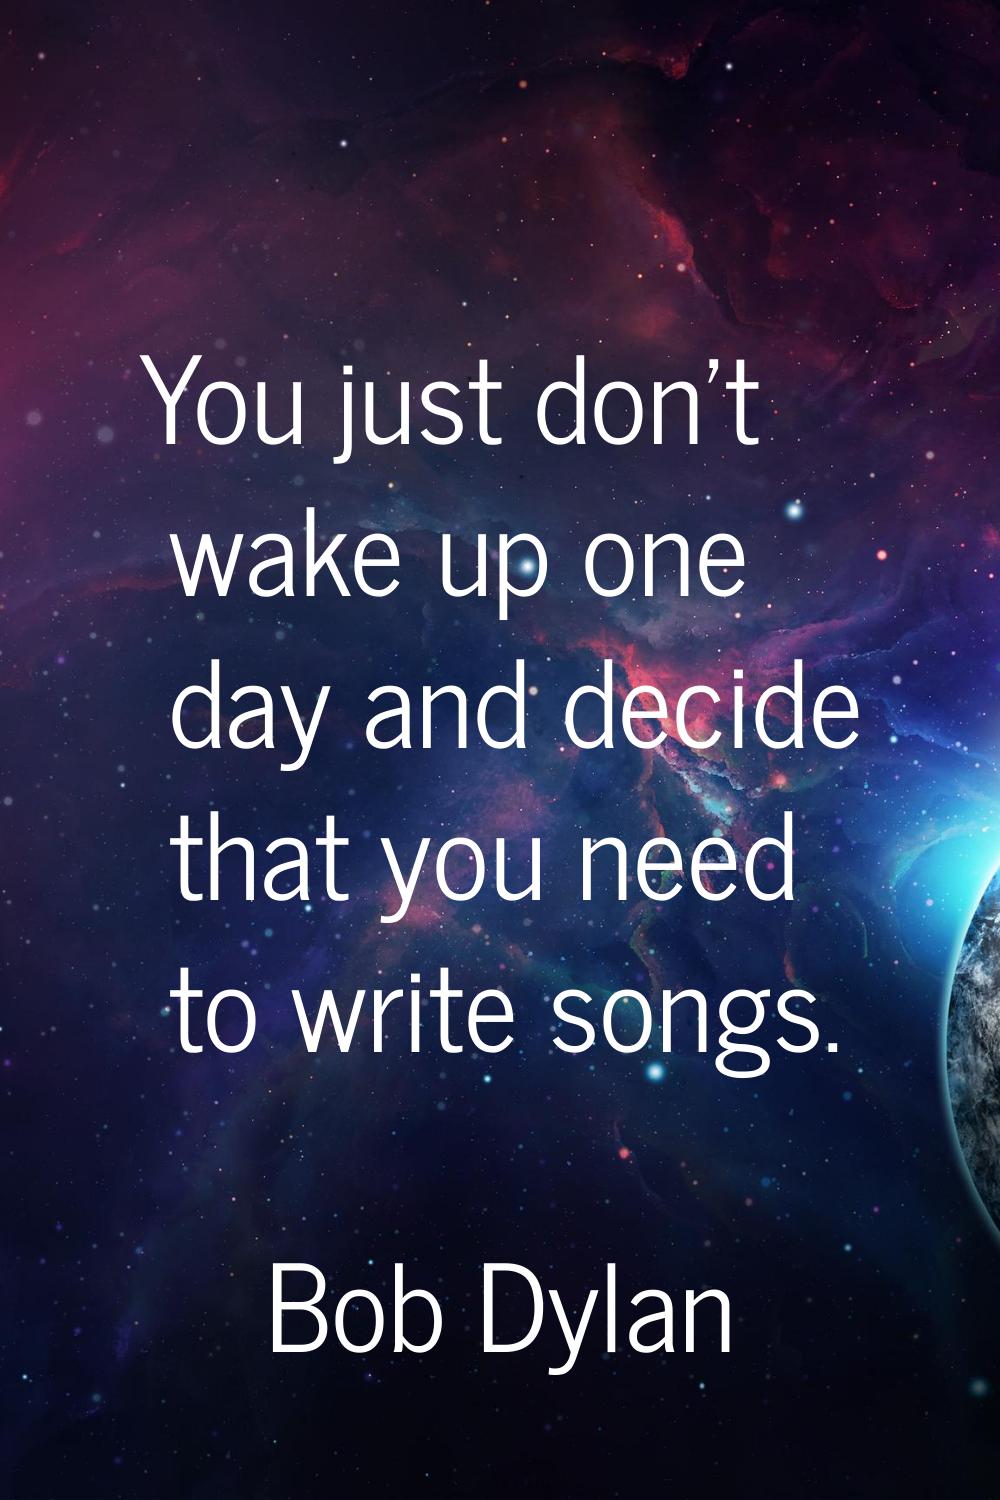 You just don't wake up one day and decide that you need to write songs.